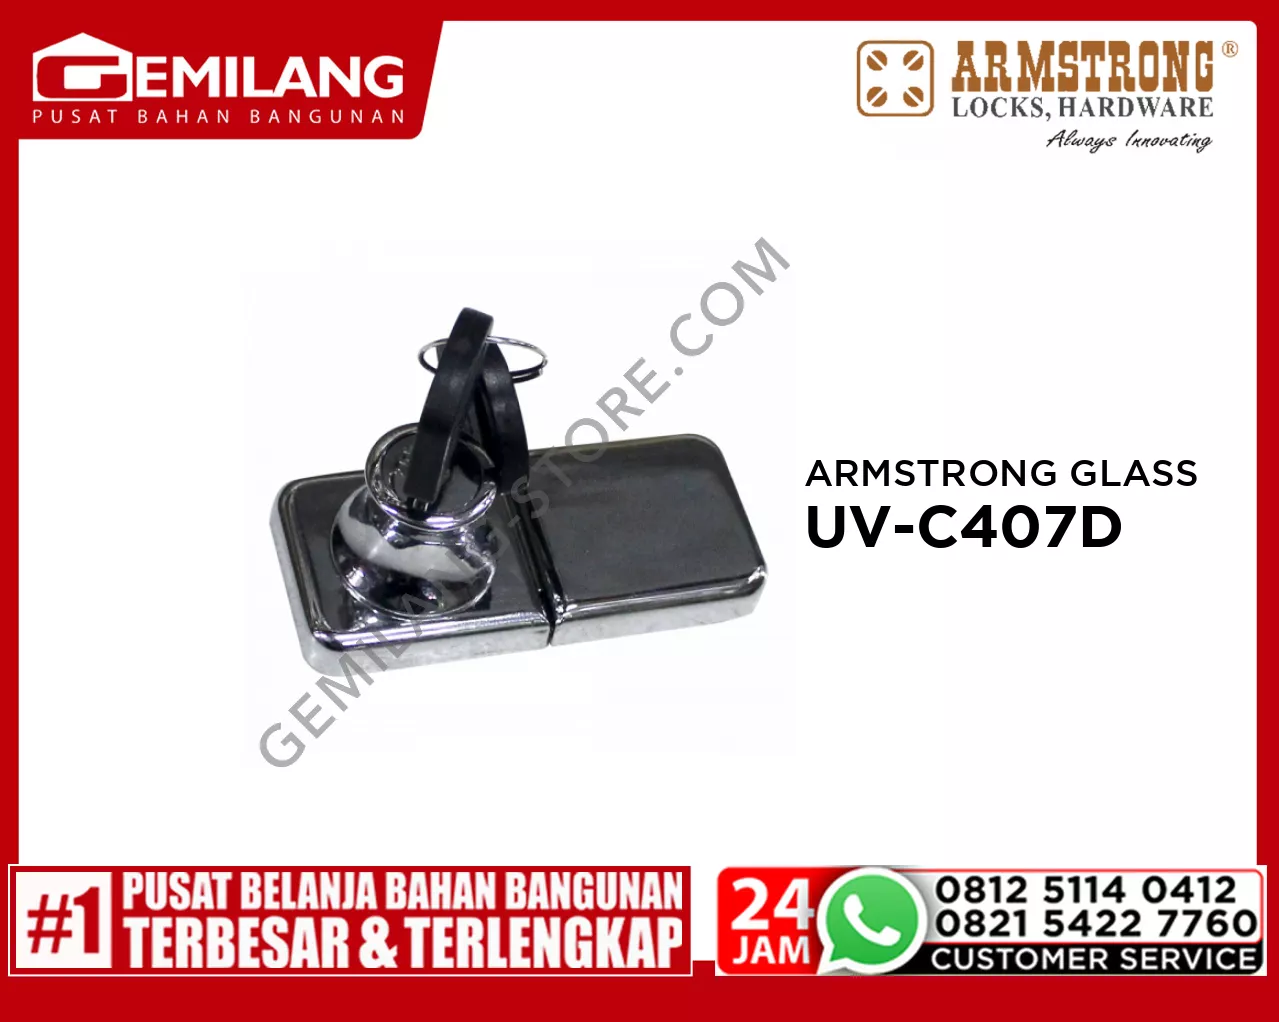 ARMSTRONG GLASS LOCK UV-C407D SQUARE DOUBLE 22 CH ZINC ALLOY